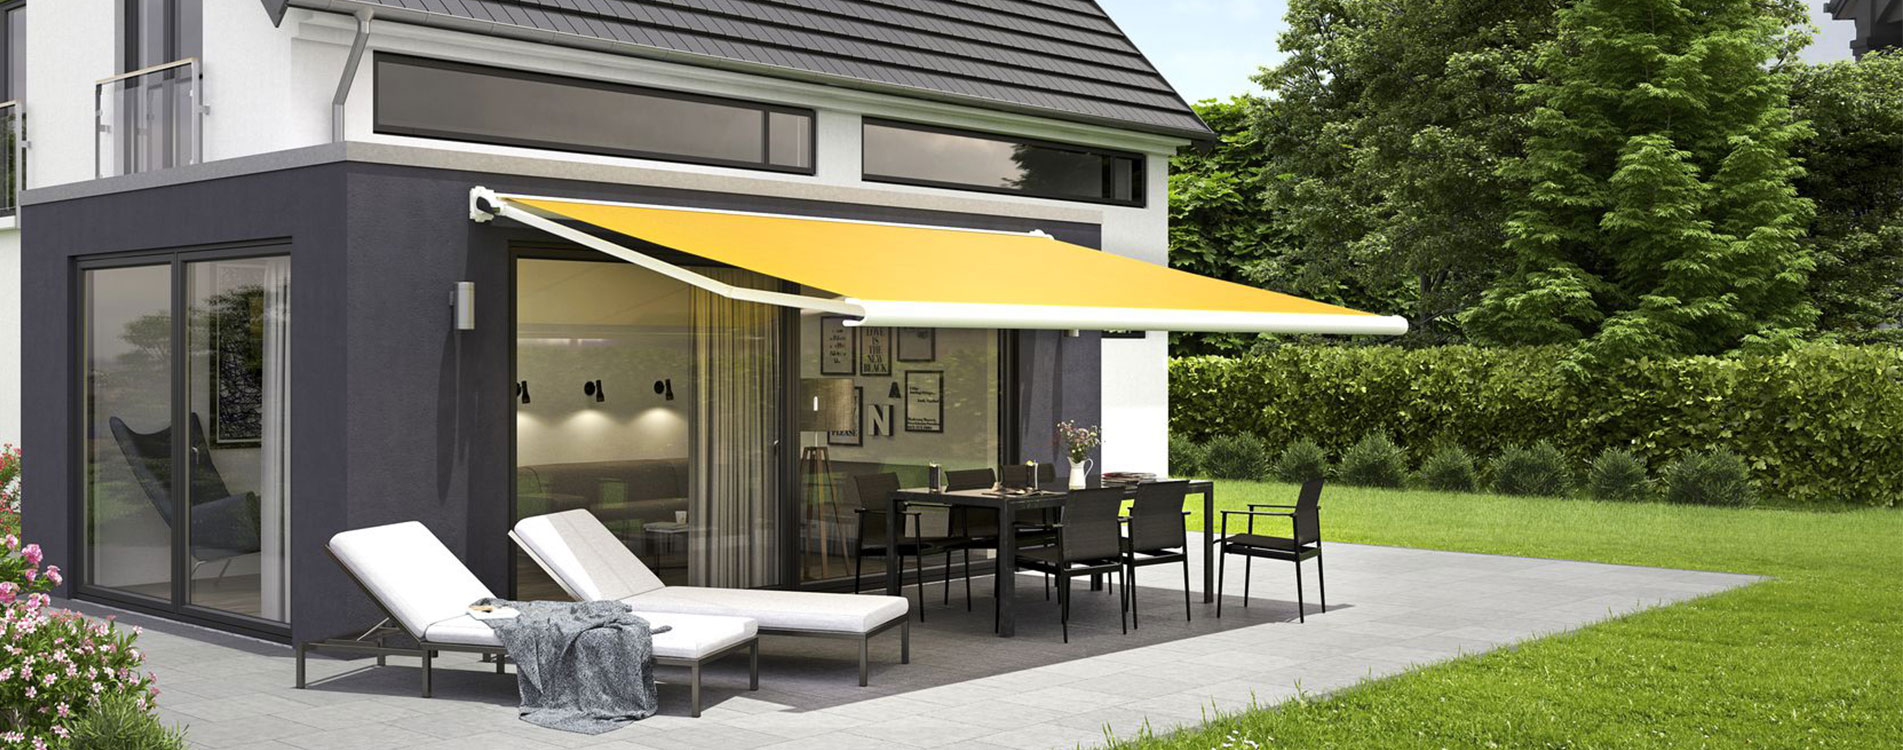 Markilux 990 patio awnings